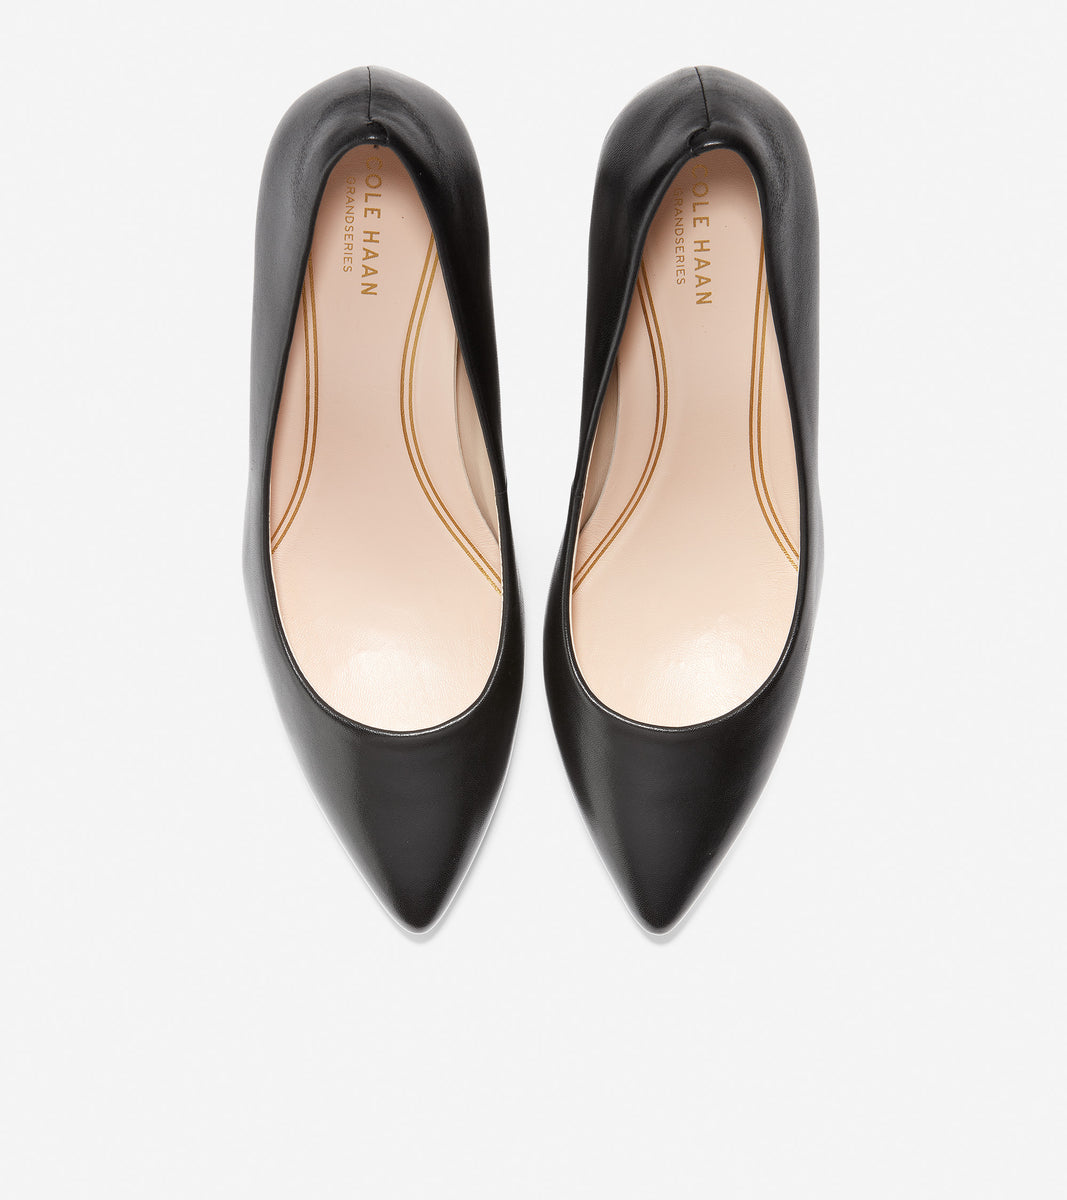 ColeHaan-Grand Ambition Pump-w15828-Black Leather